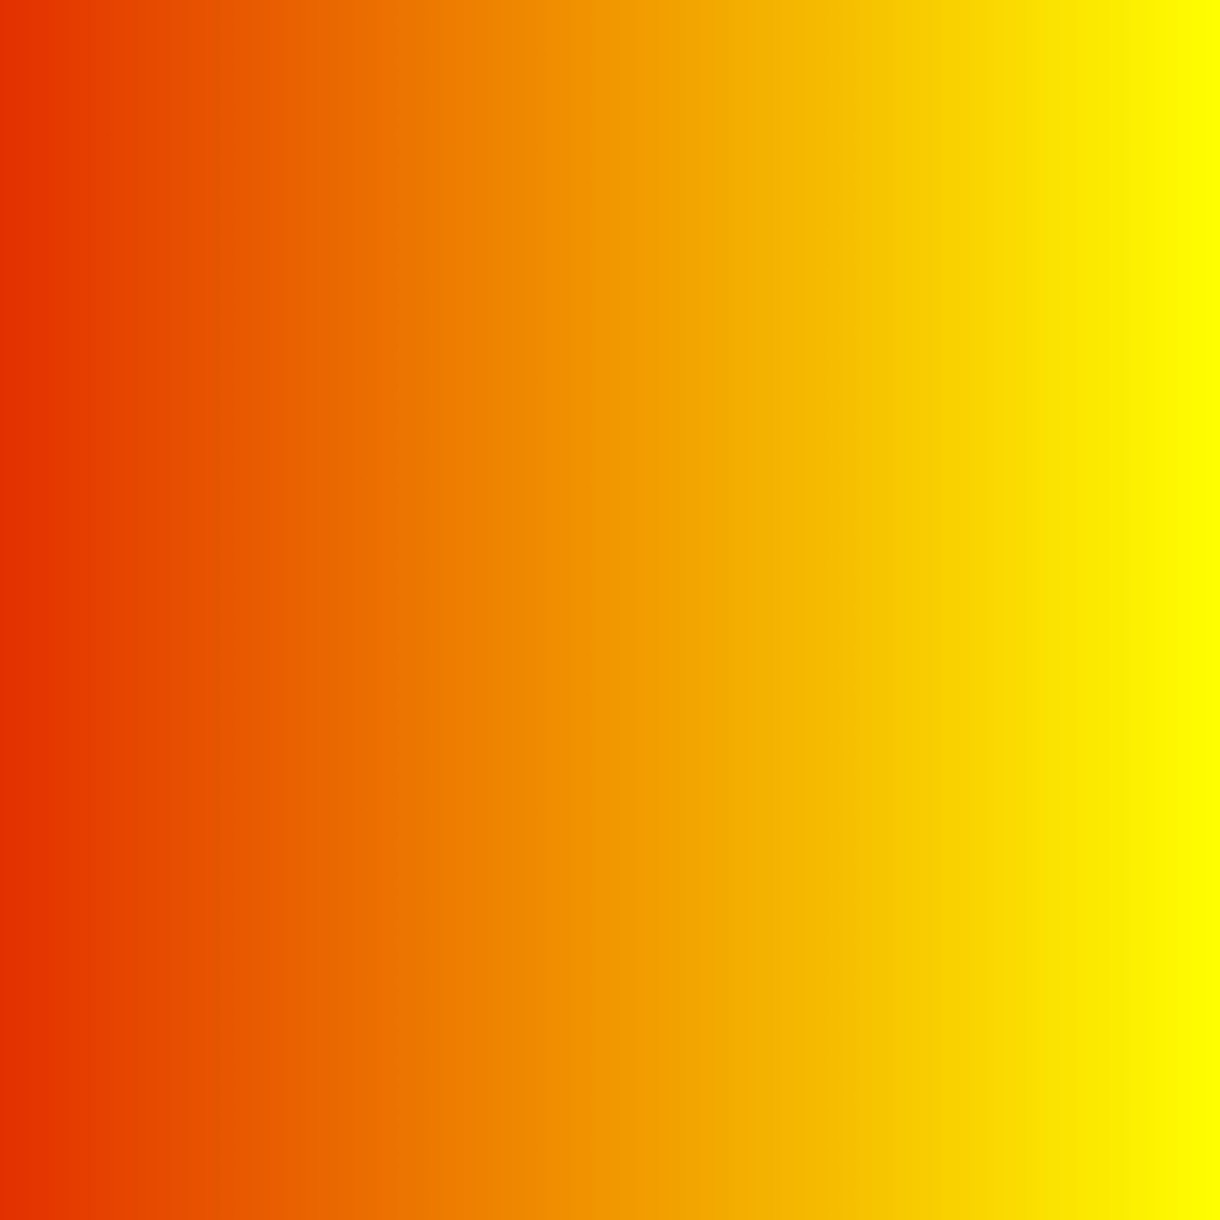 RED TO YELLOW